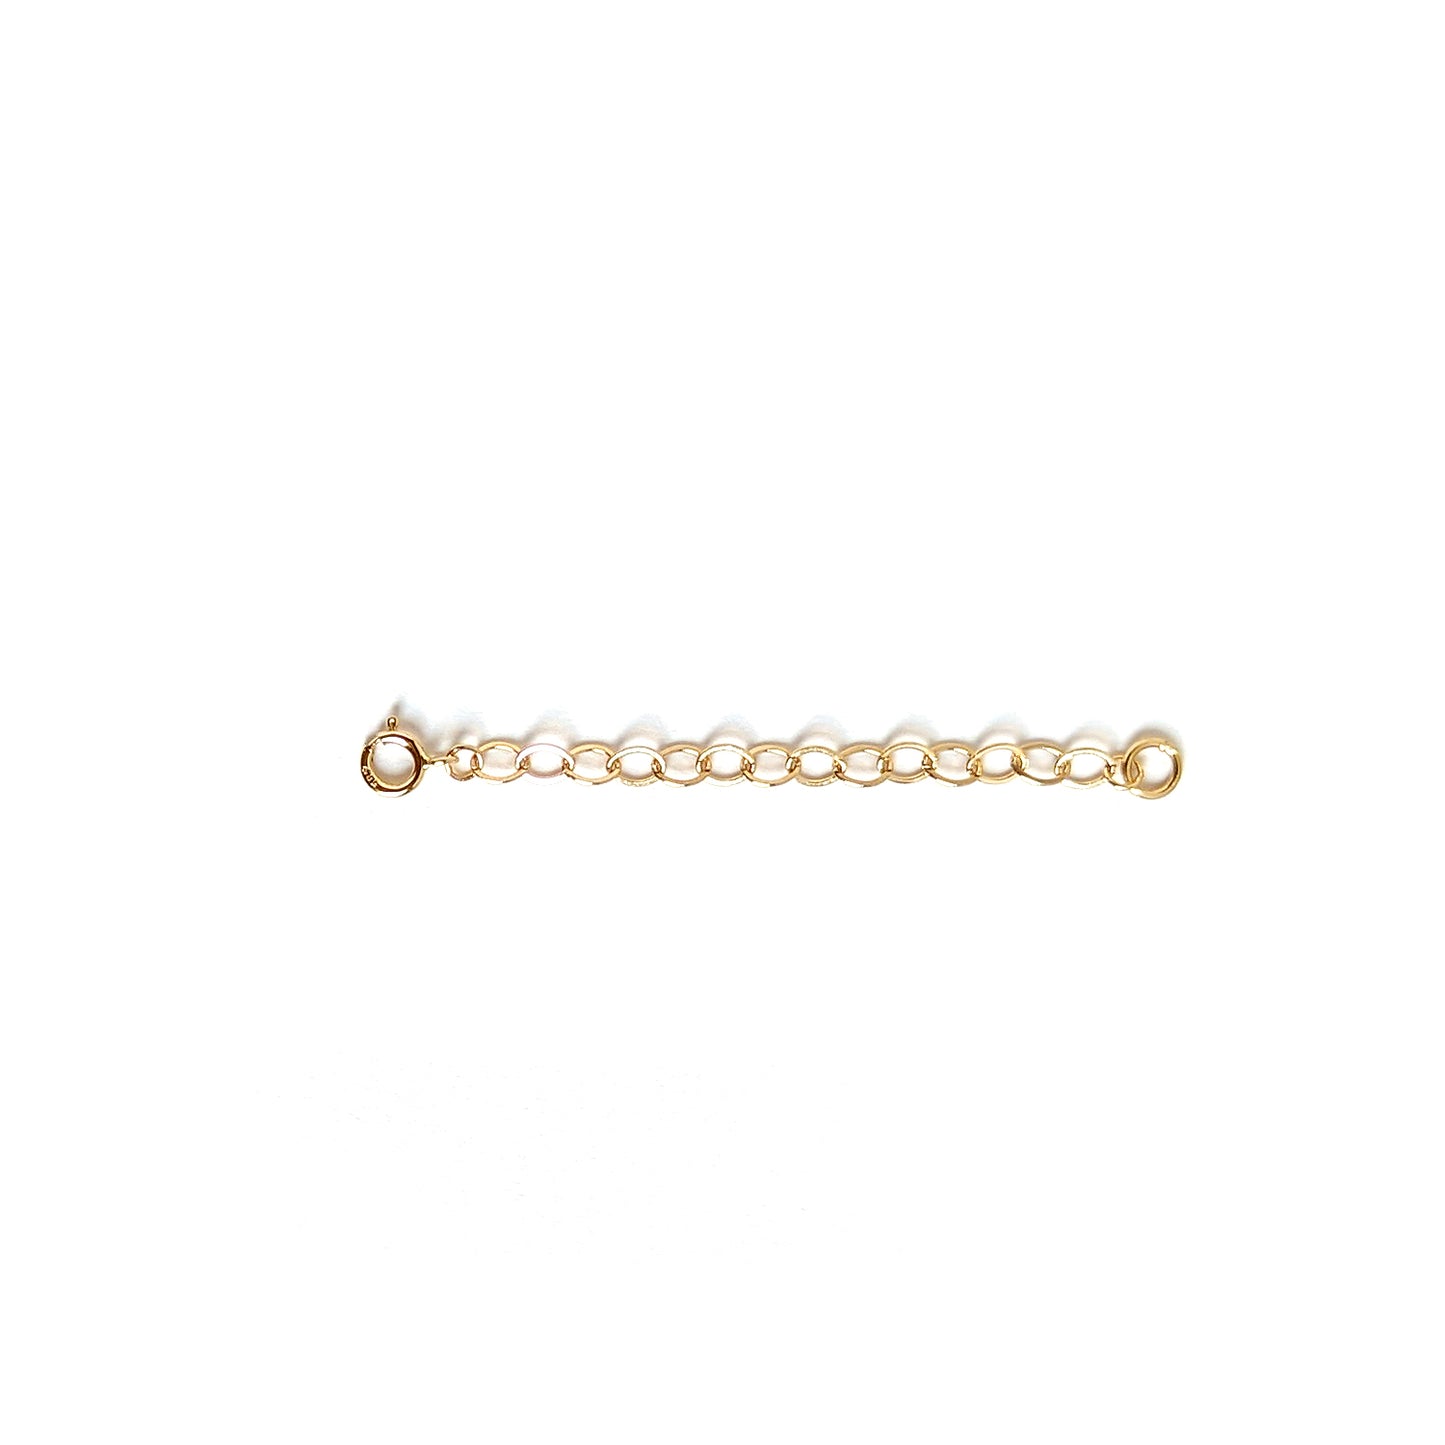 Gold cable chain extender for necklaces